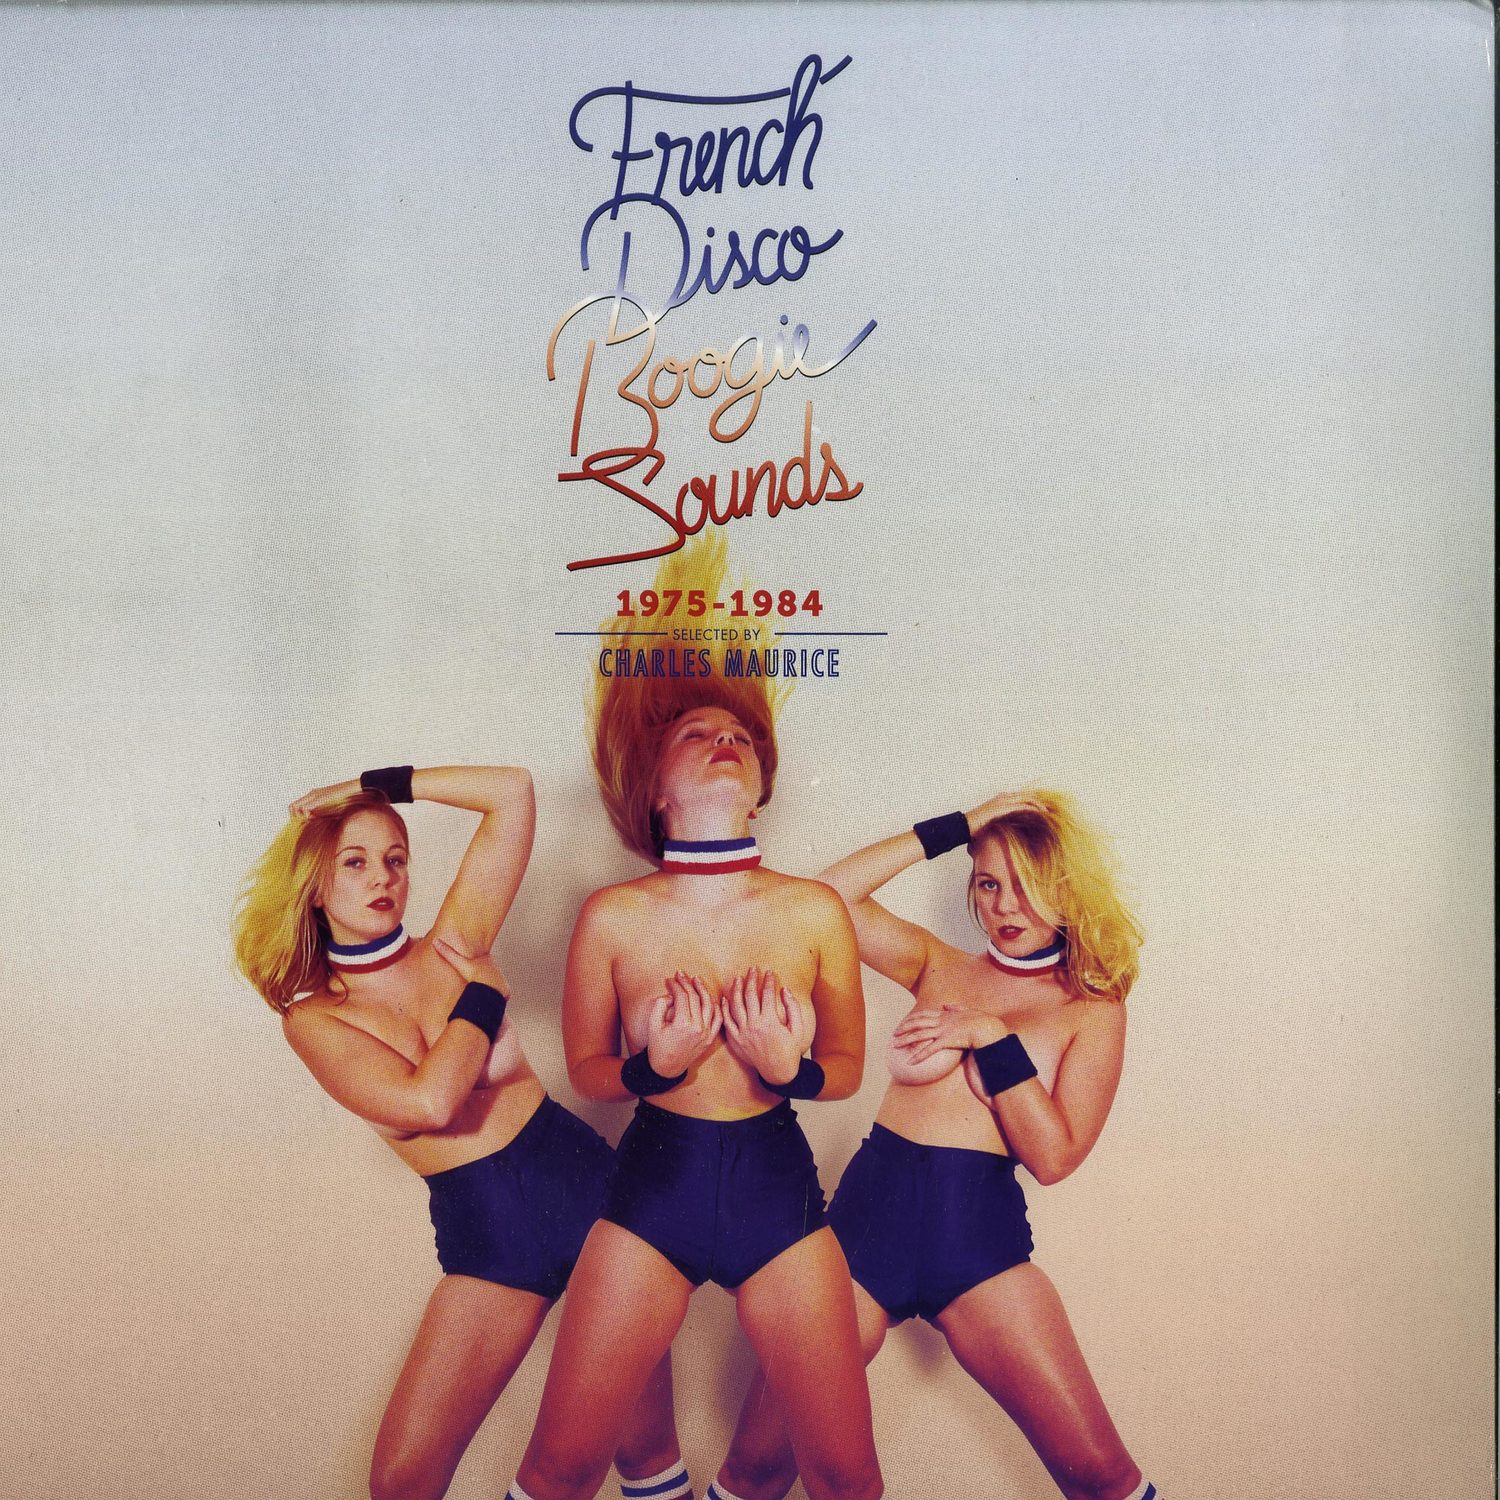 Various Artists - FRENCH DISCO BOOGIE SOUNDS 